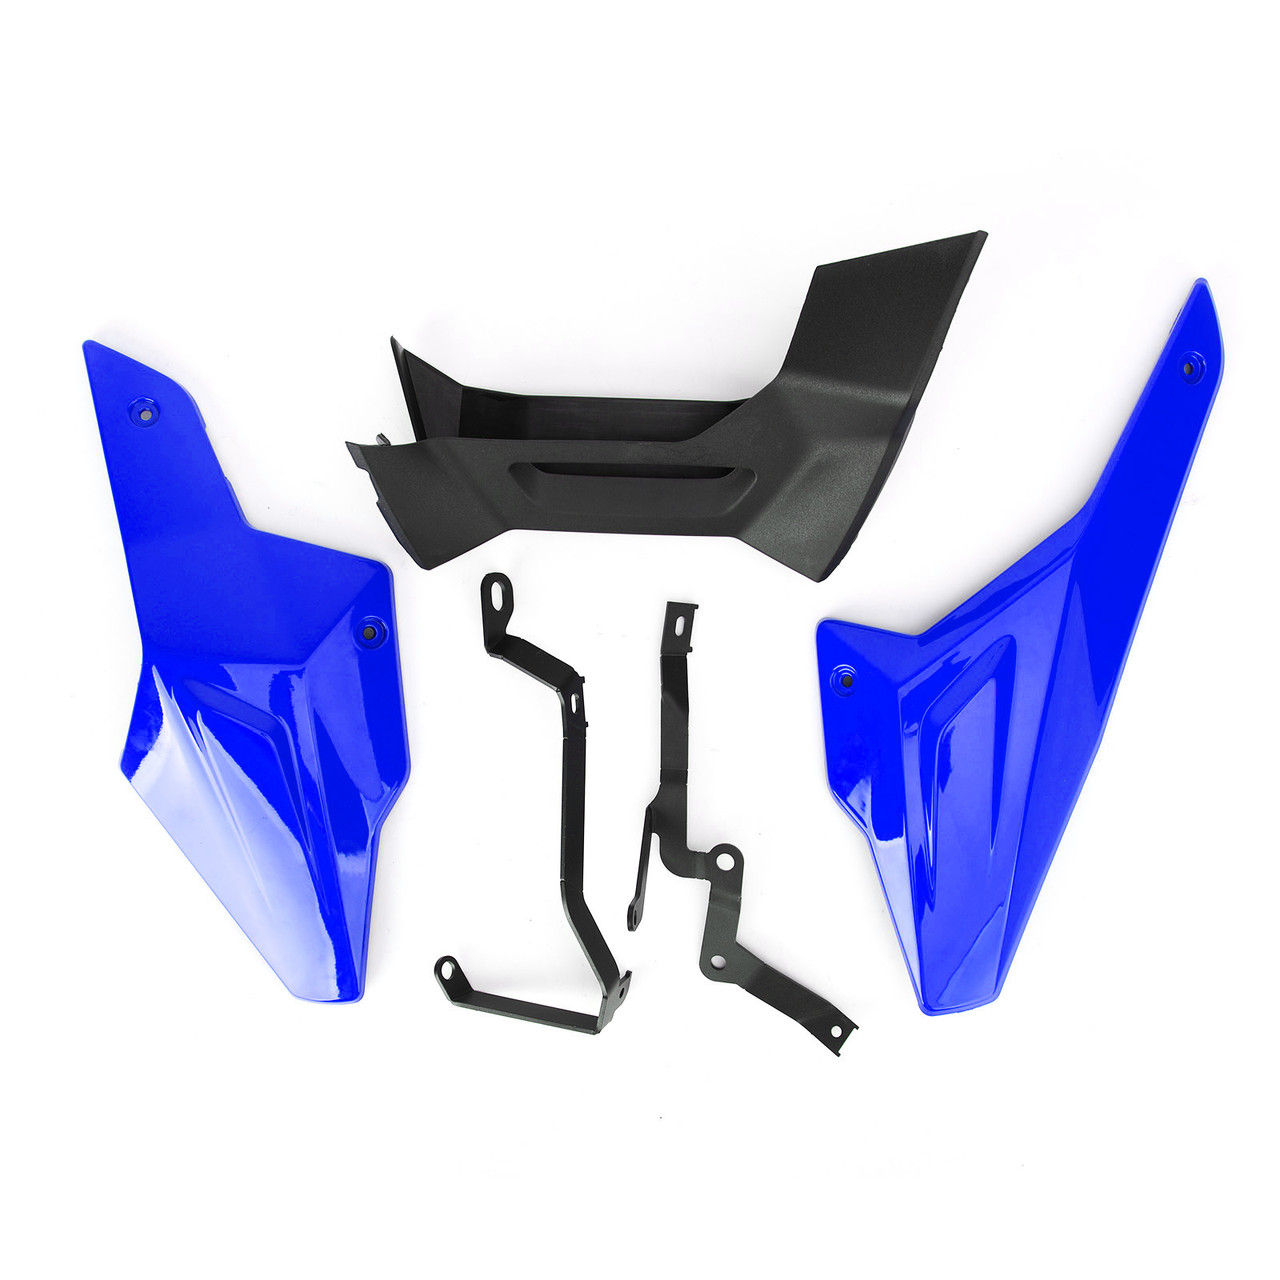 Lower Cowling Cover Fairing Fit for BMW F900R F900XR 2020-2021 Blue